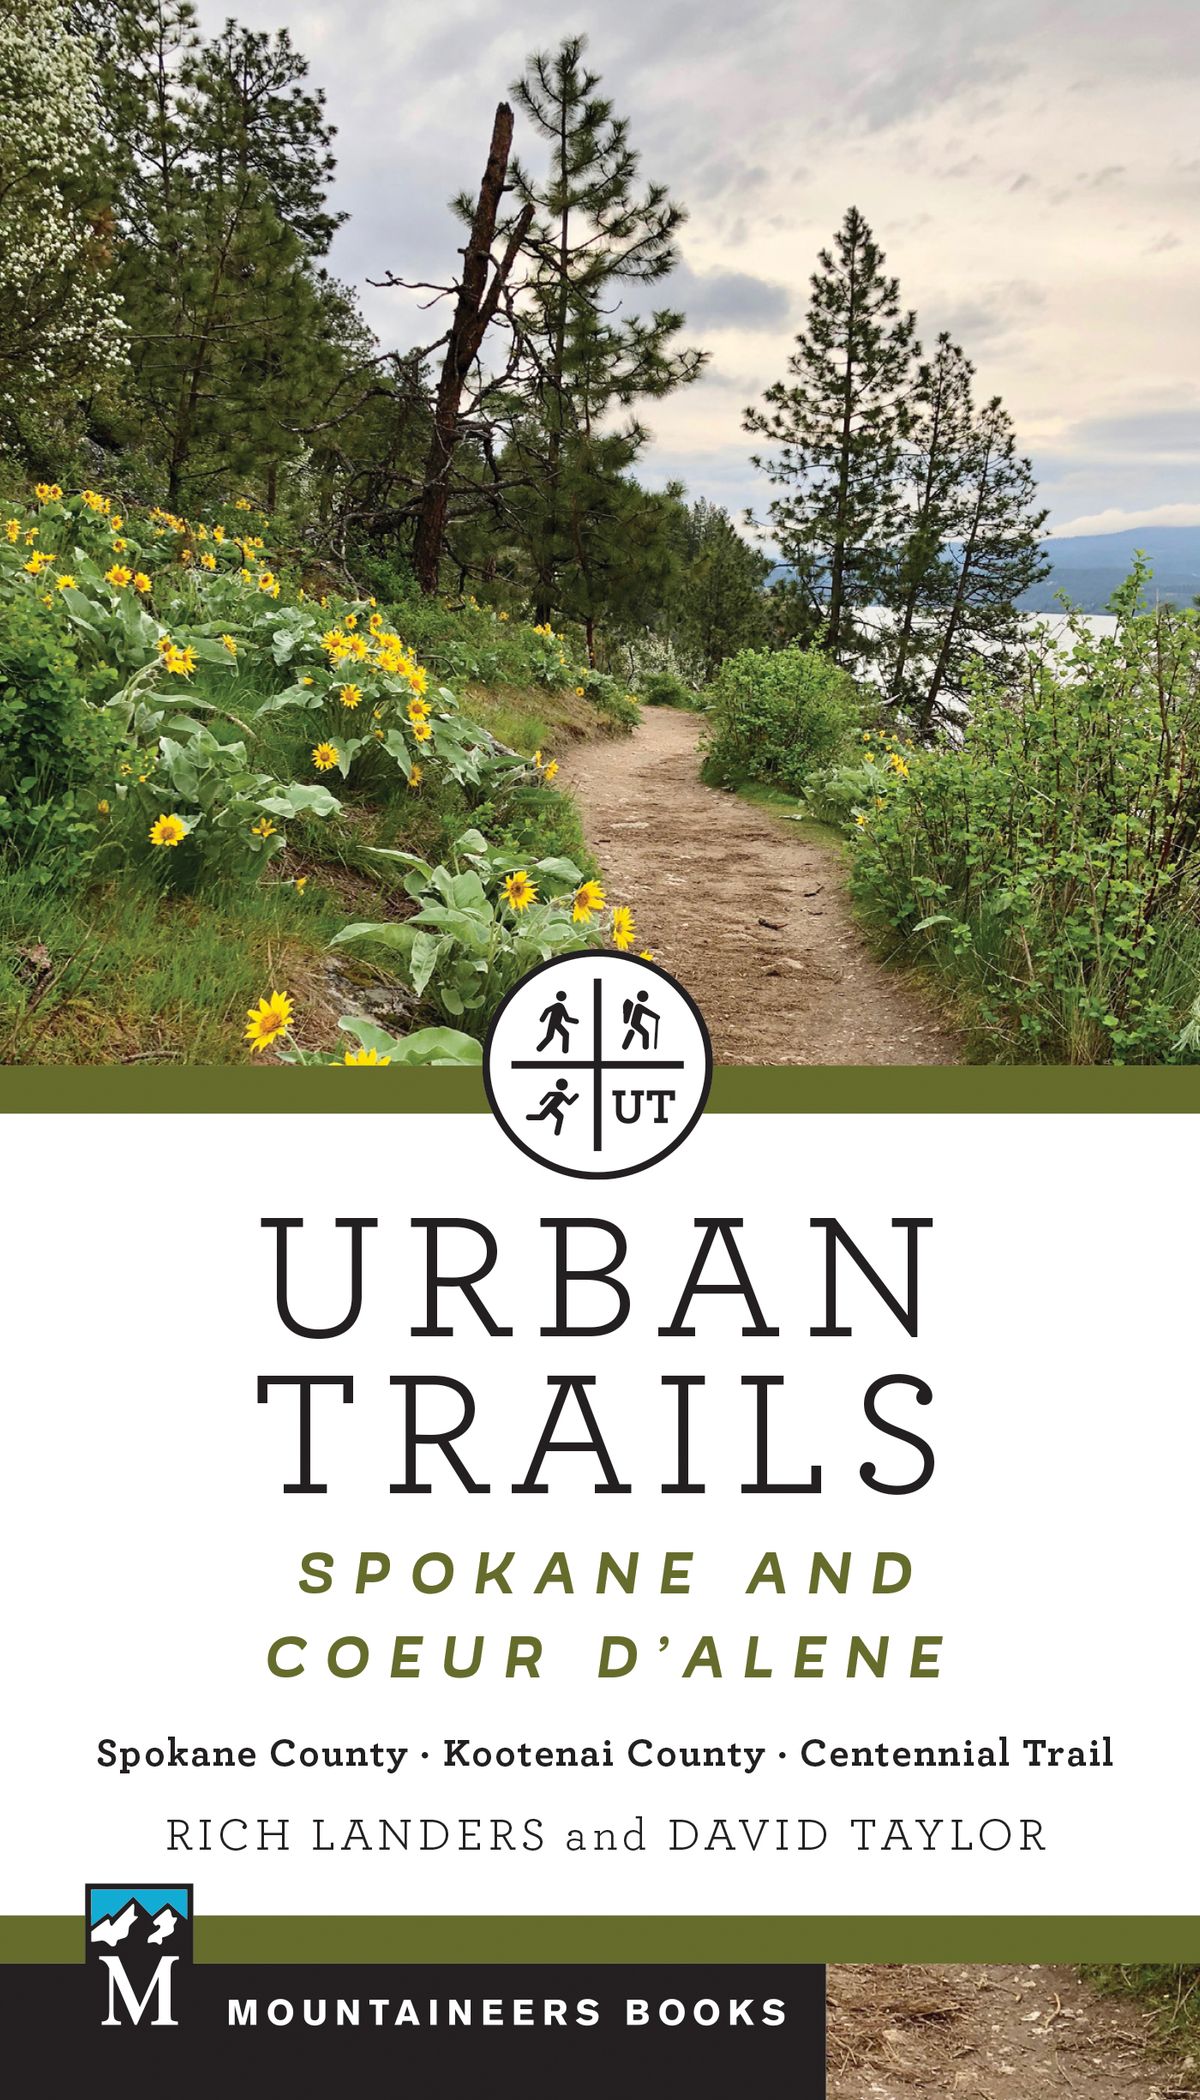 The cover of “Urban Trails,” a new book co-authored by former Spokesman-Review outdoors editor Rich Landers and David Taylor. 